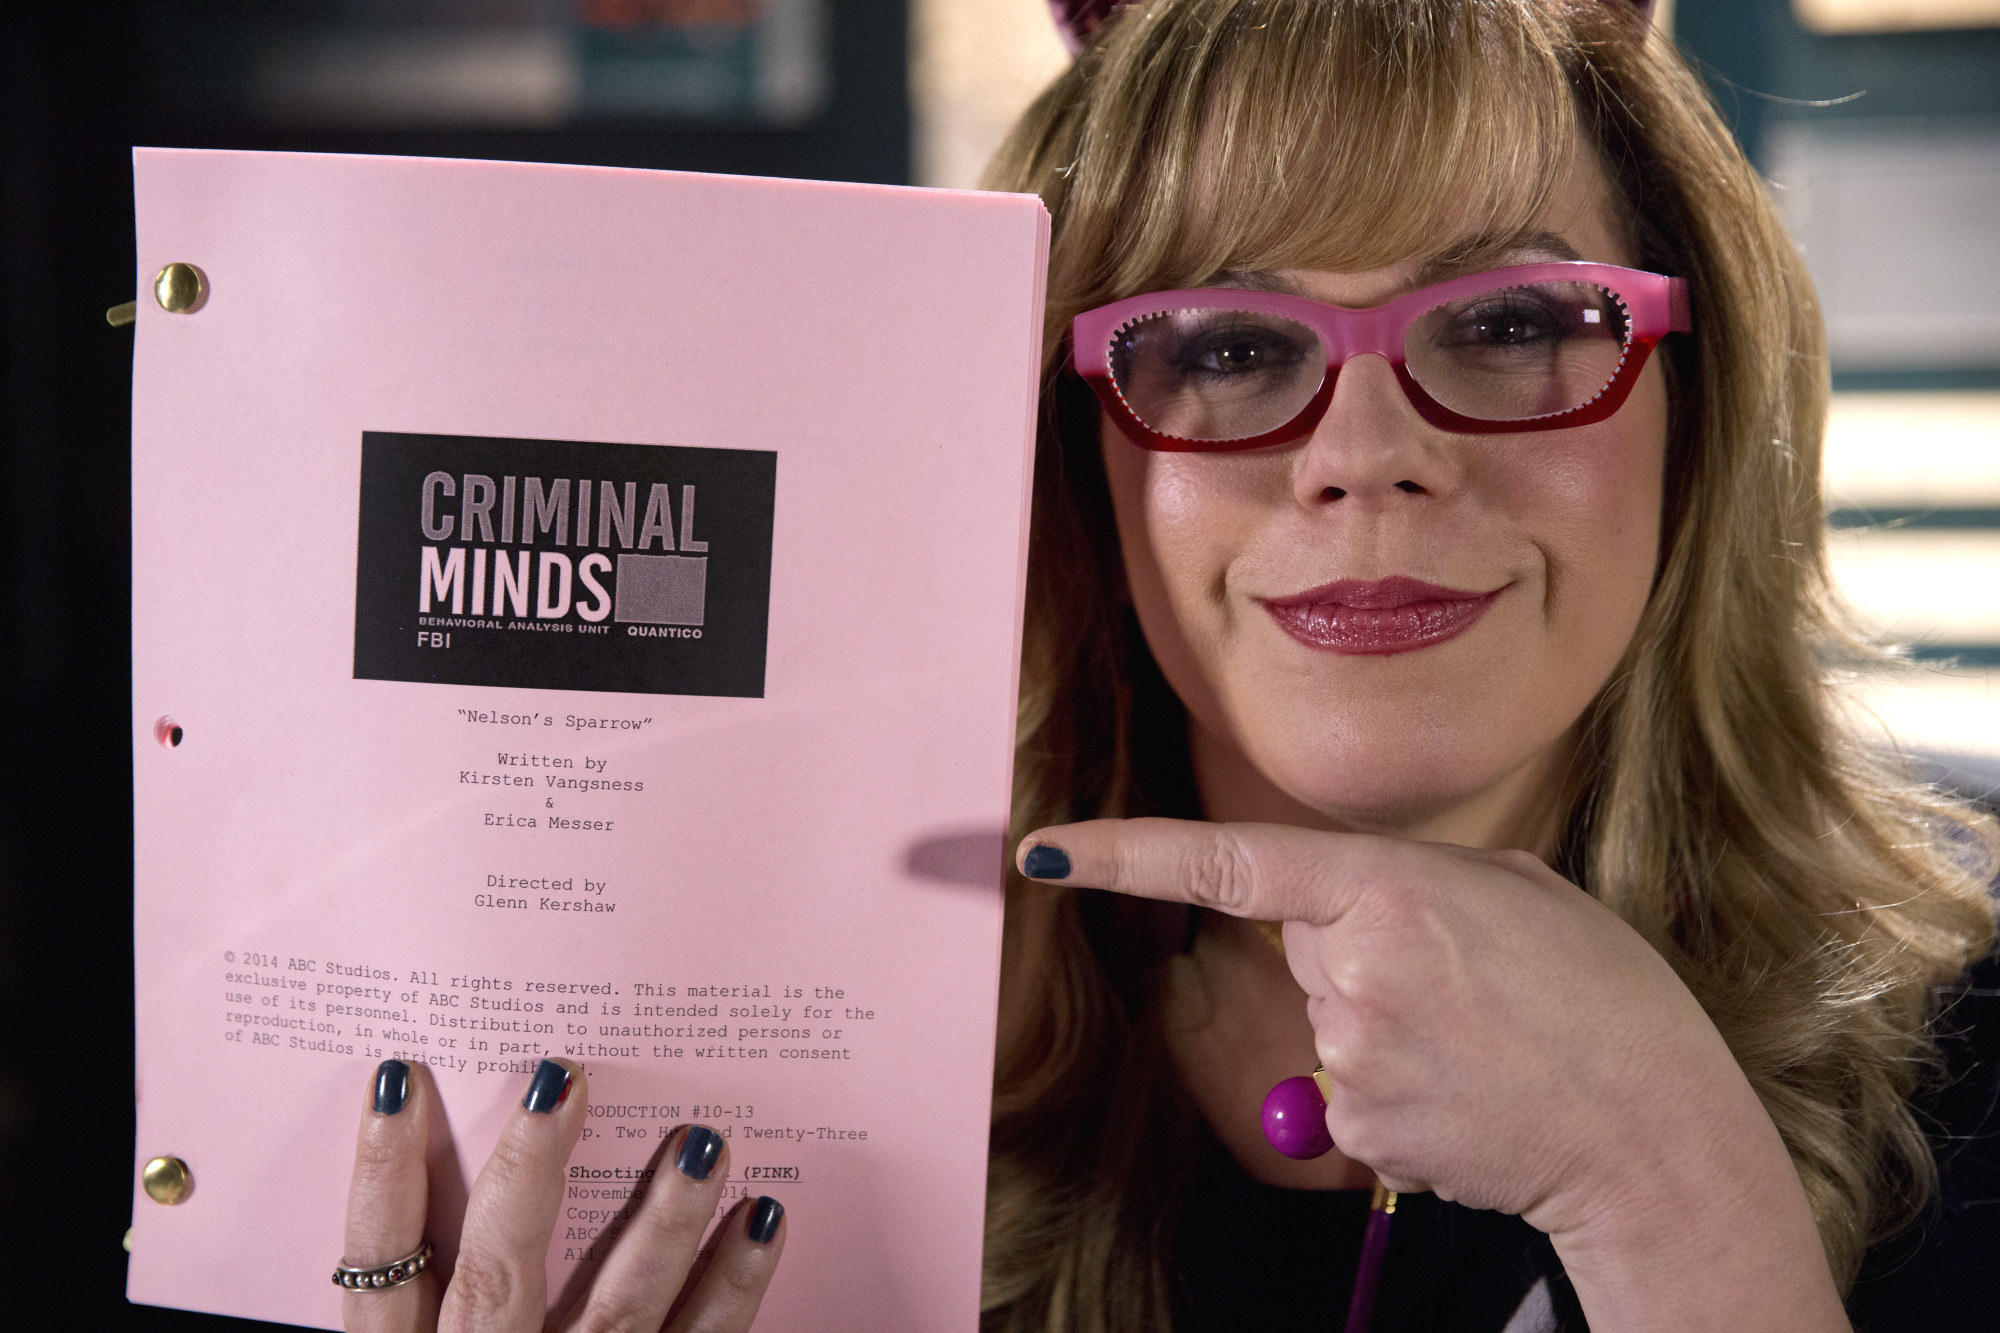 Kirsten Vangsness holding up and pointing to a Criminal Minds script